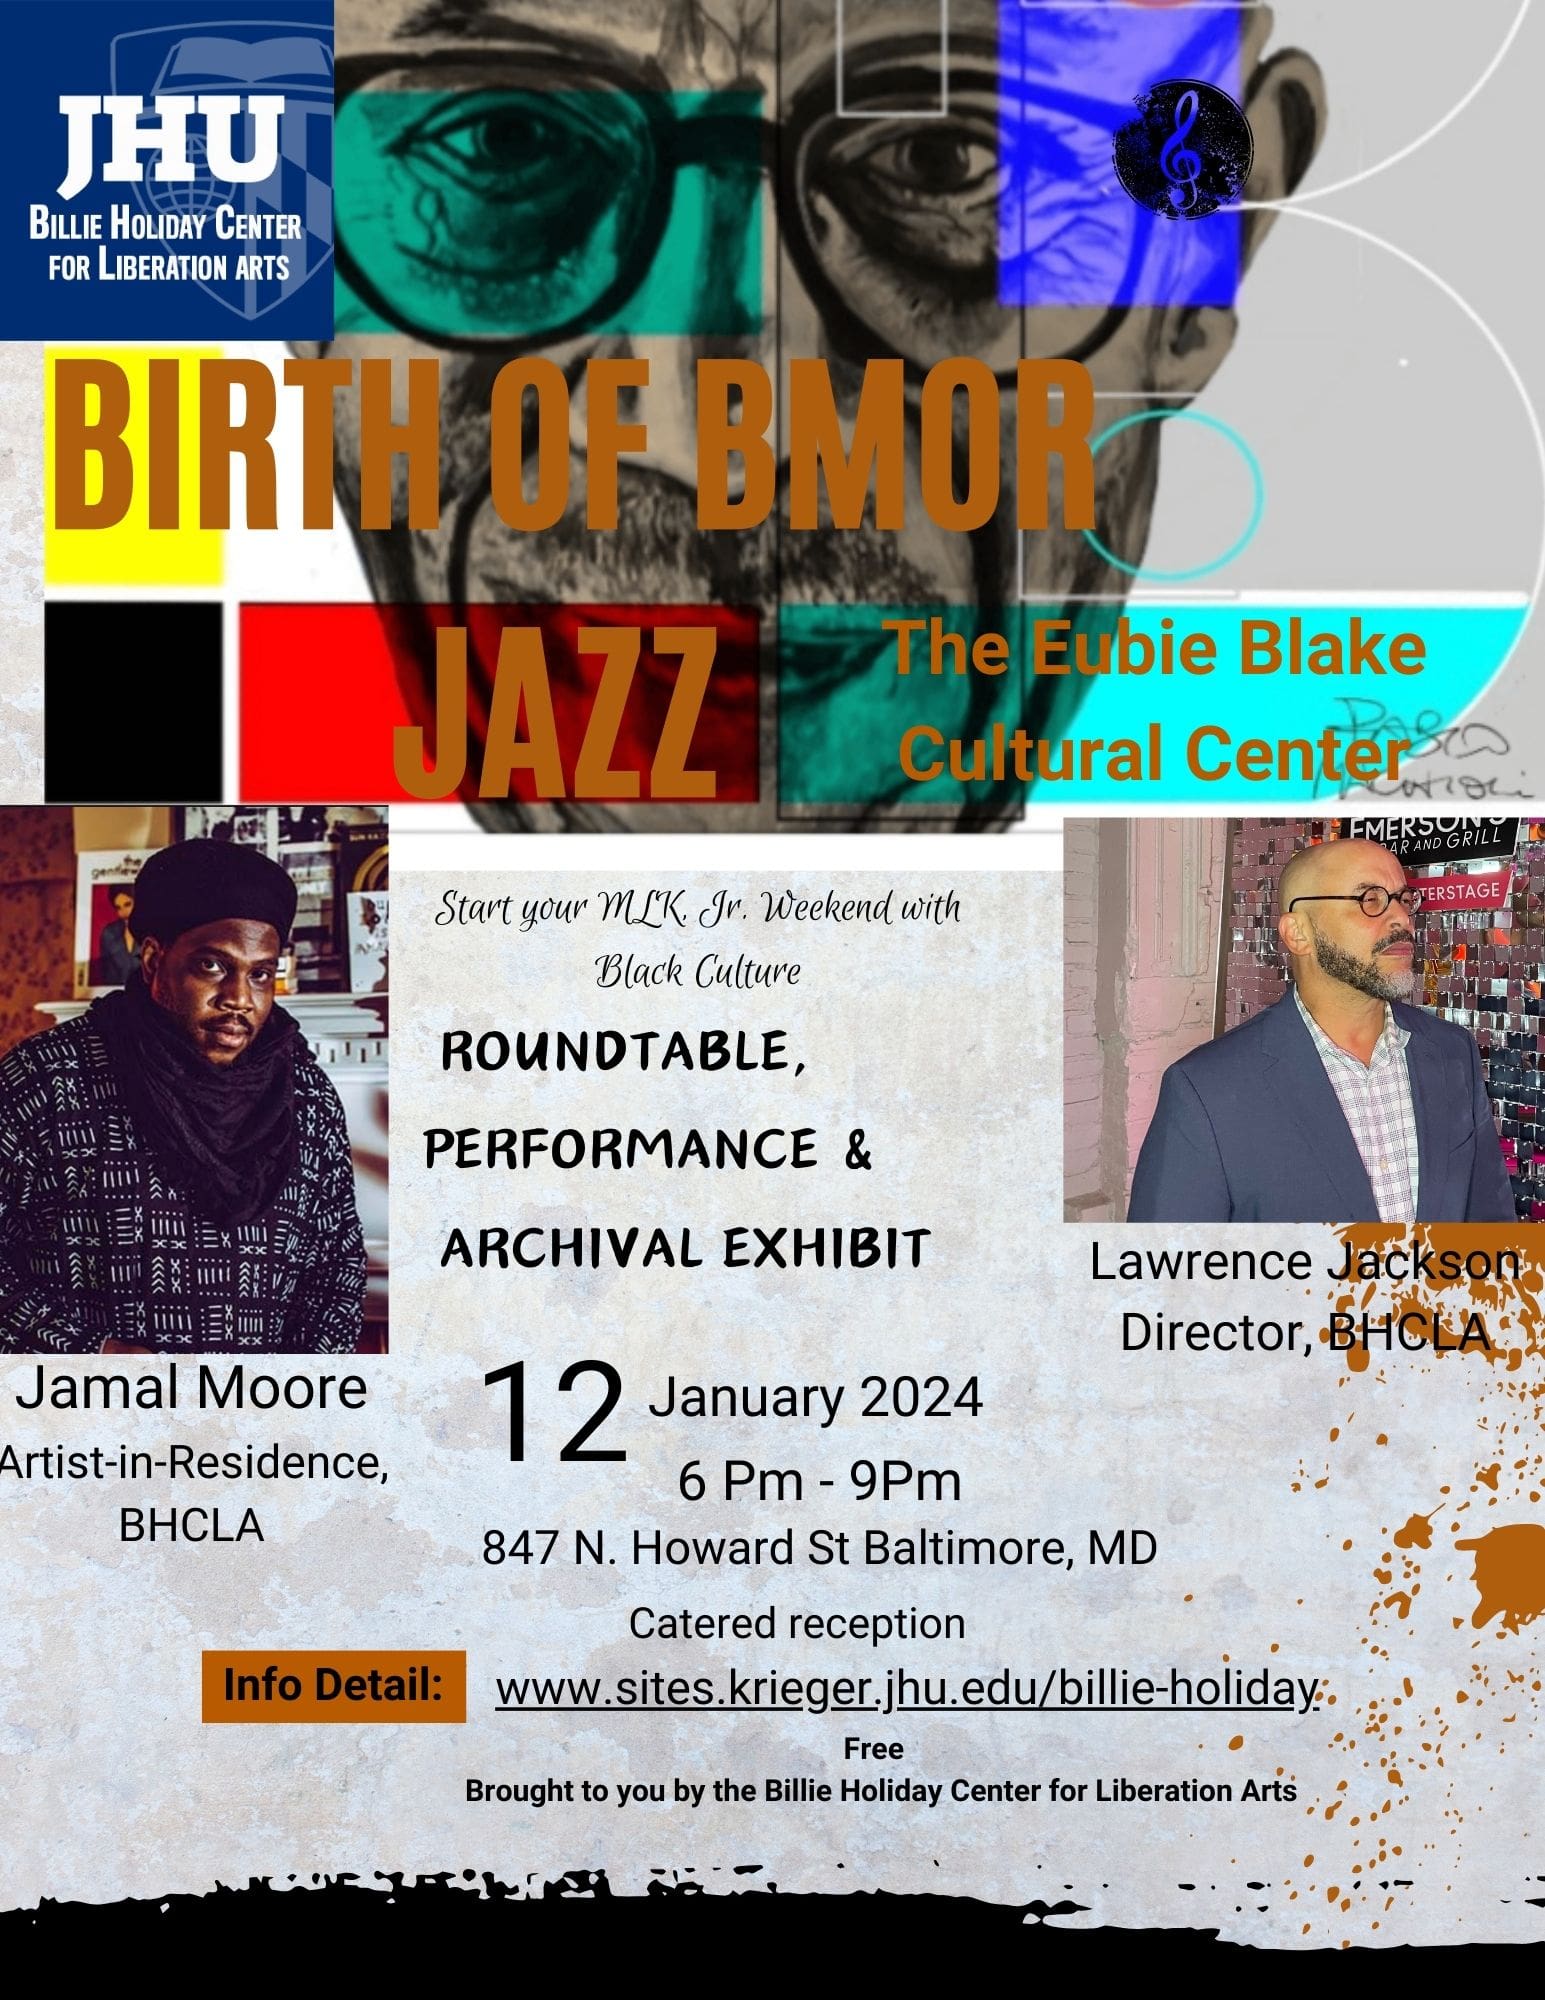 flyer for the Birth of Jazz event with Jamal Moore and Larry Jackson's headshots